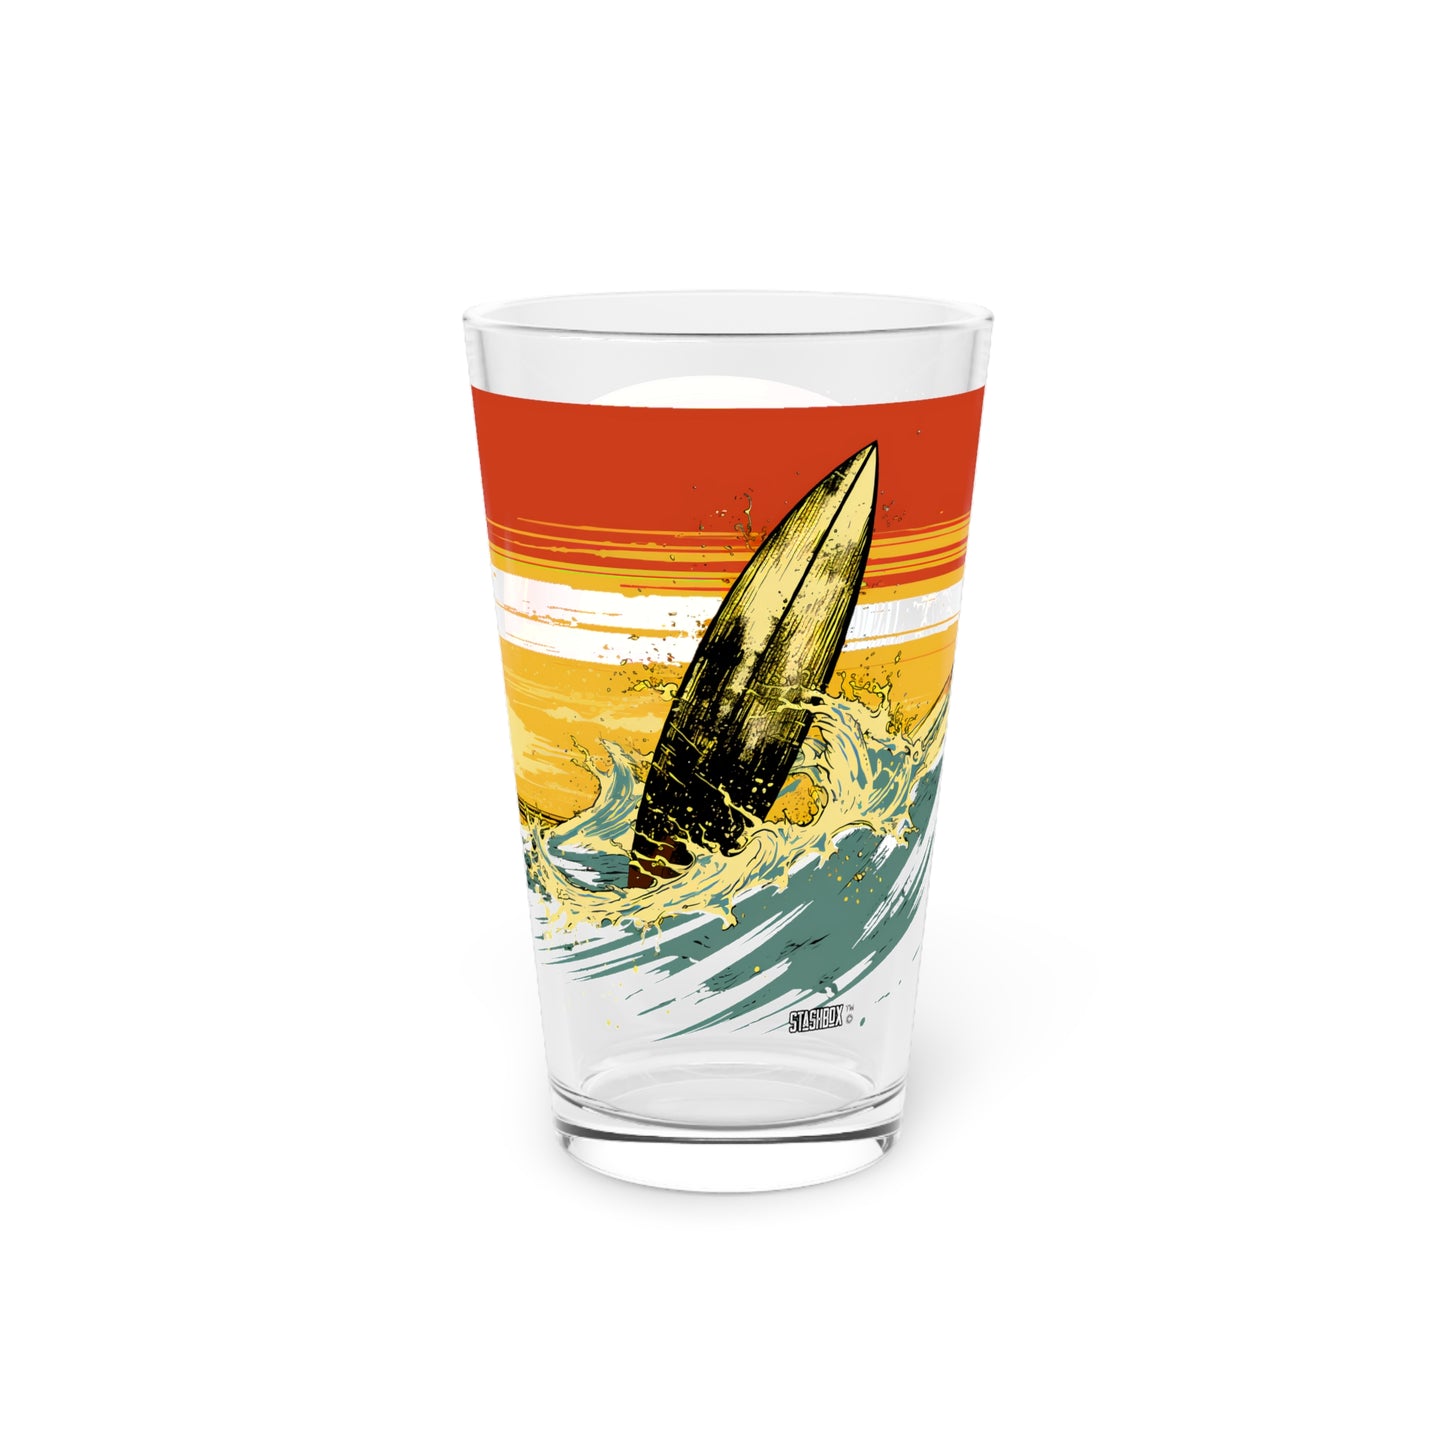 Ride the waves of style with our Classic Surfing Design Pint Glass, 16oz. 2 Designs in 1 - Waves Design #66. Discover the art of surfing, uniquely crafted by Stashbox.ai.